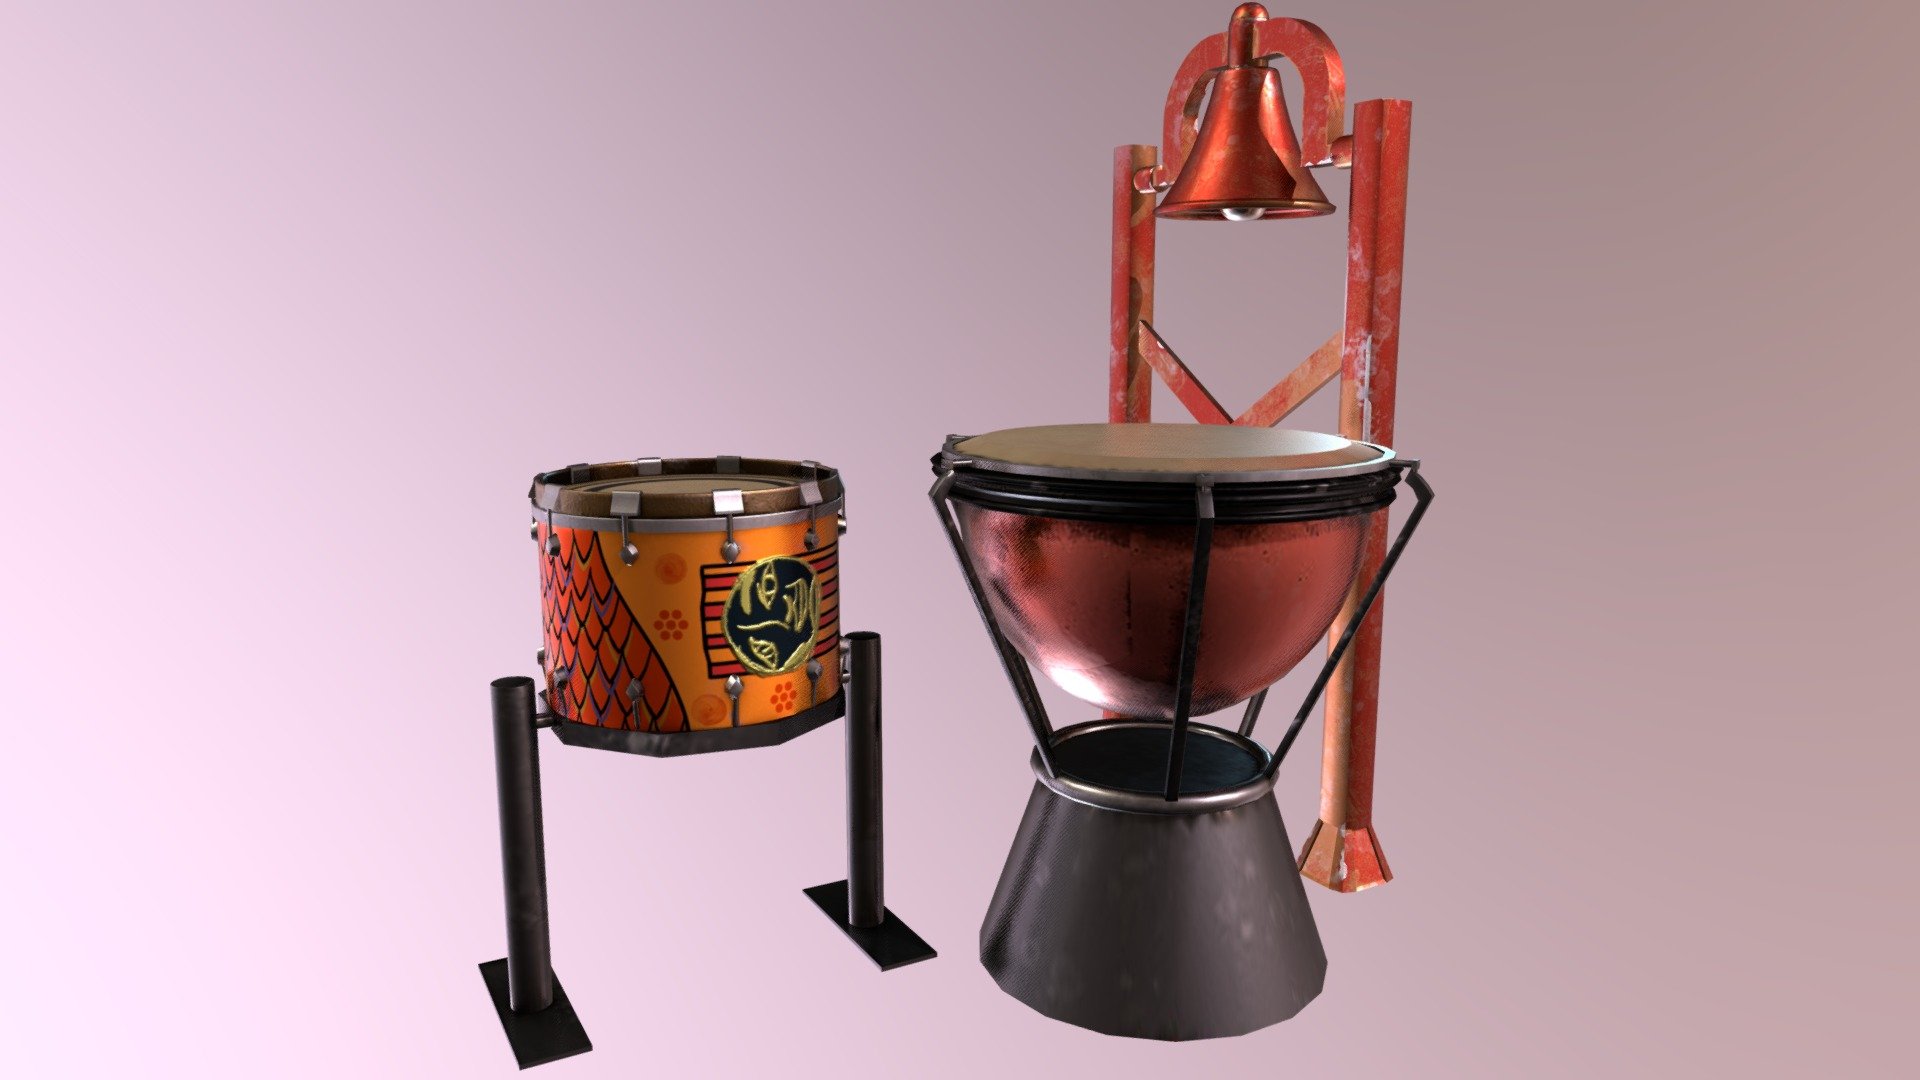 Fifth part of the project where i expect to create a musical instruments asset pack 3d model